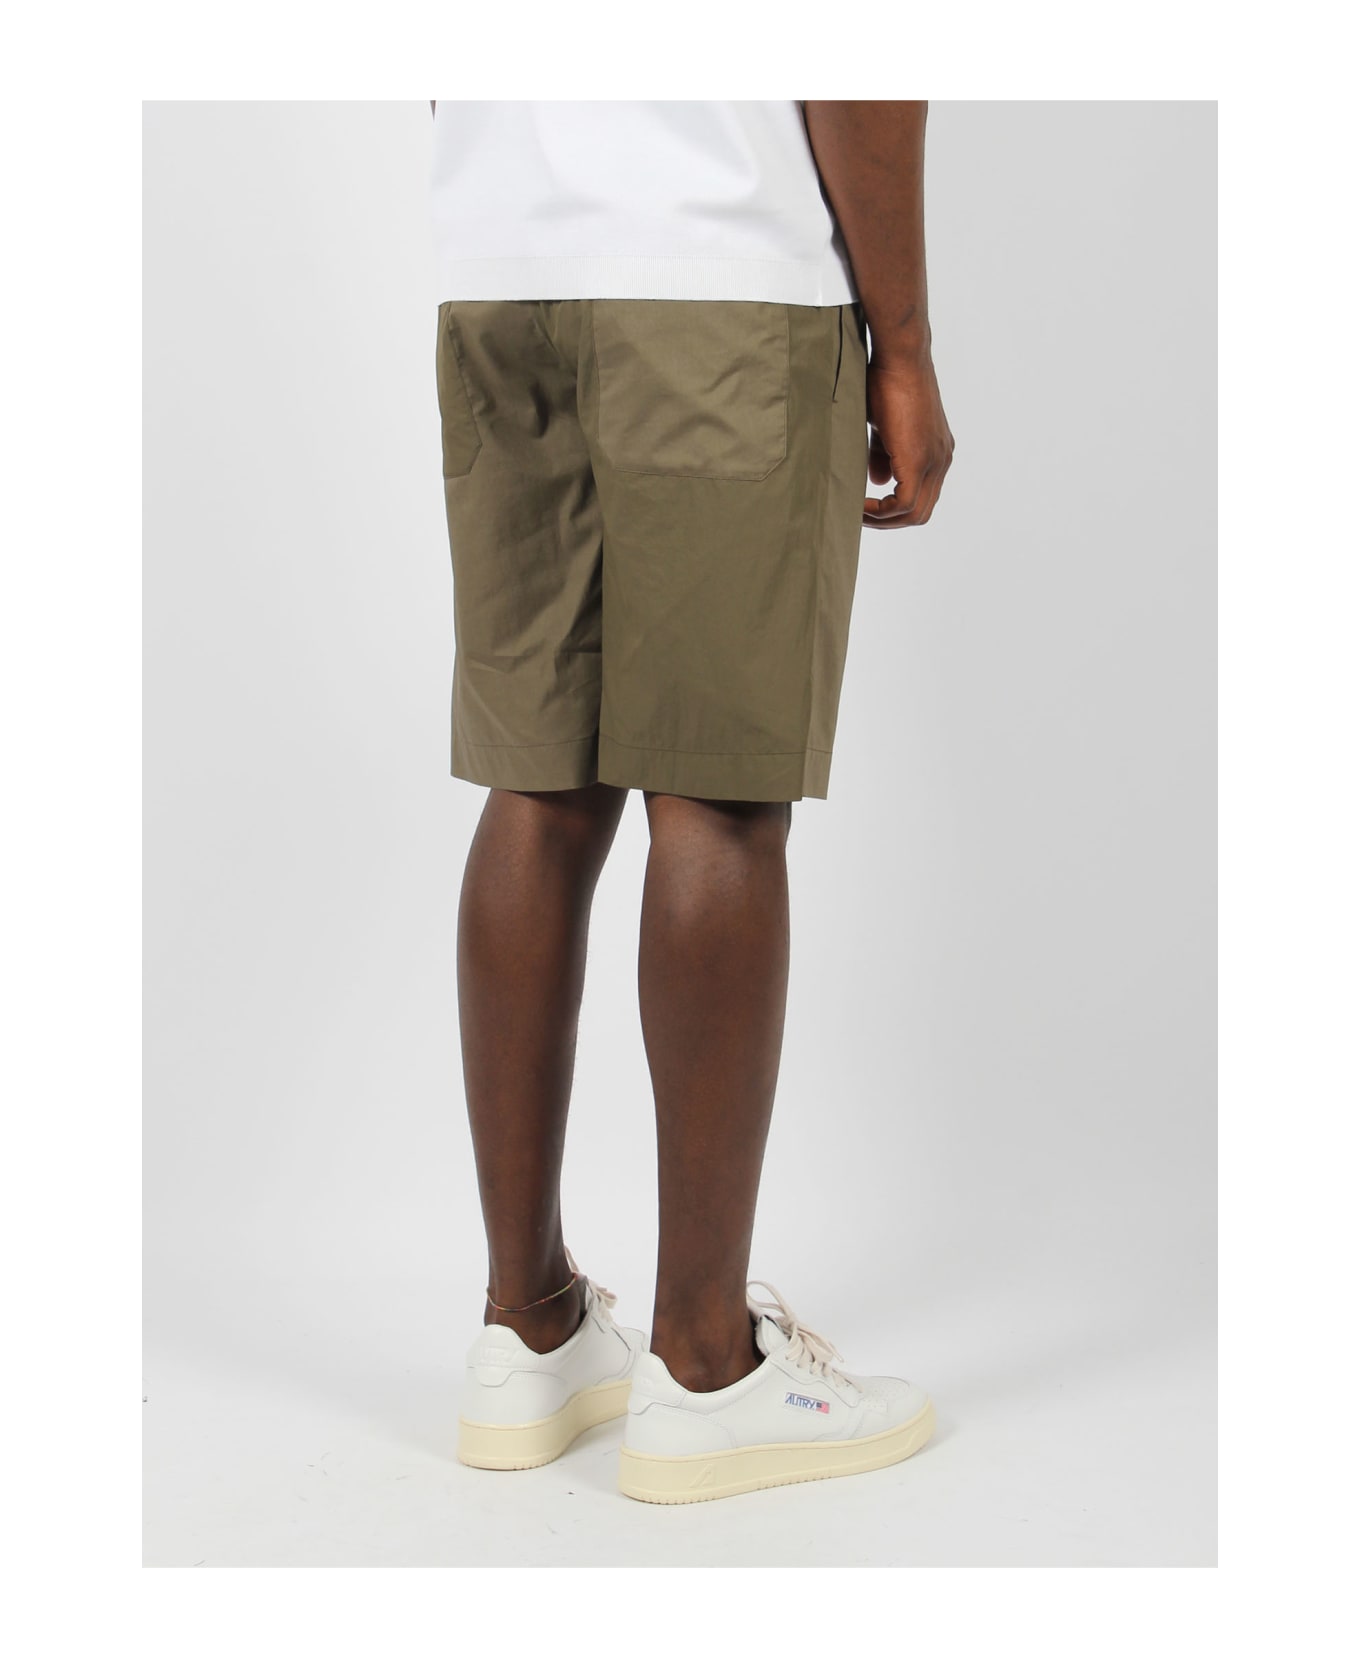 Herno Light Cotton Stretch And Ultralight Crease Shorts - Green